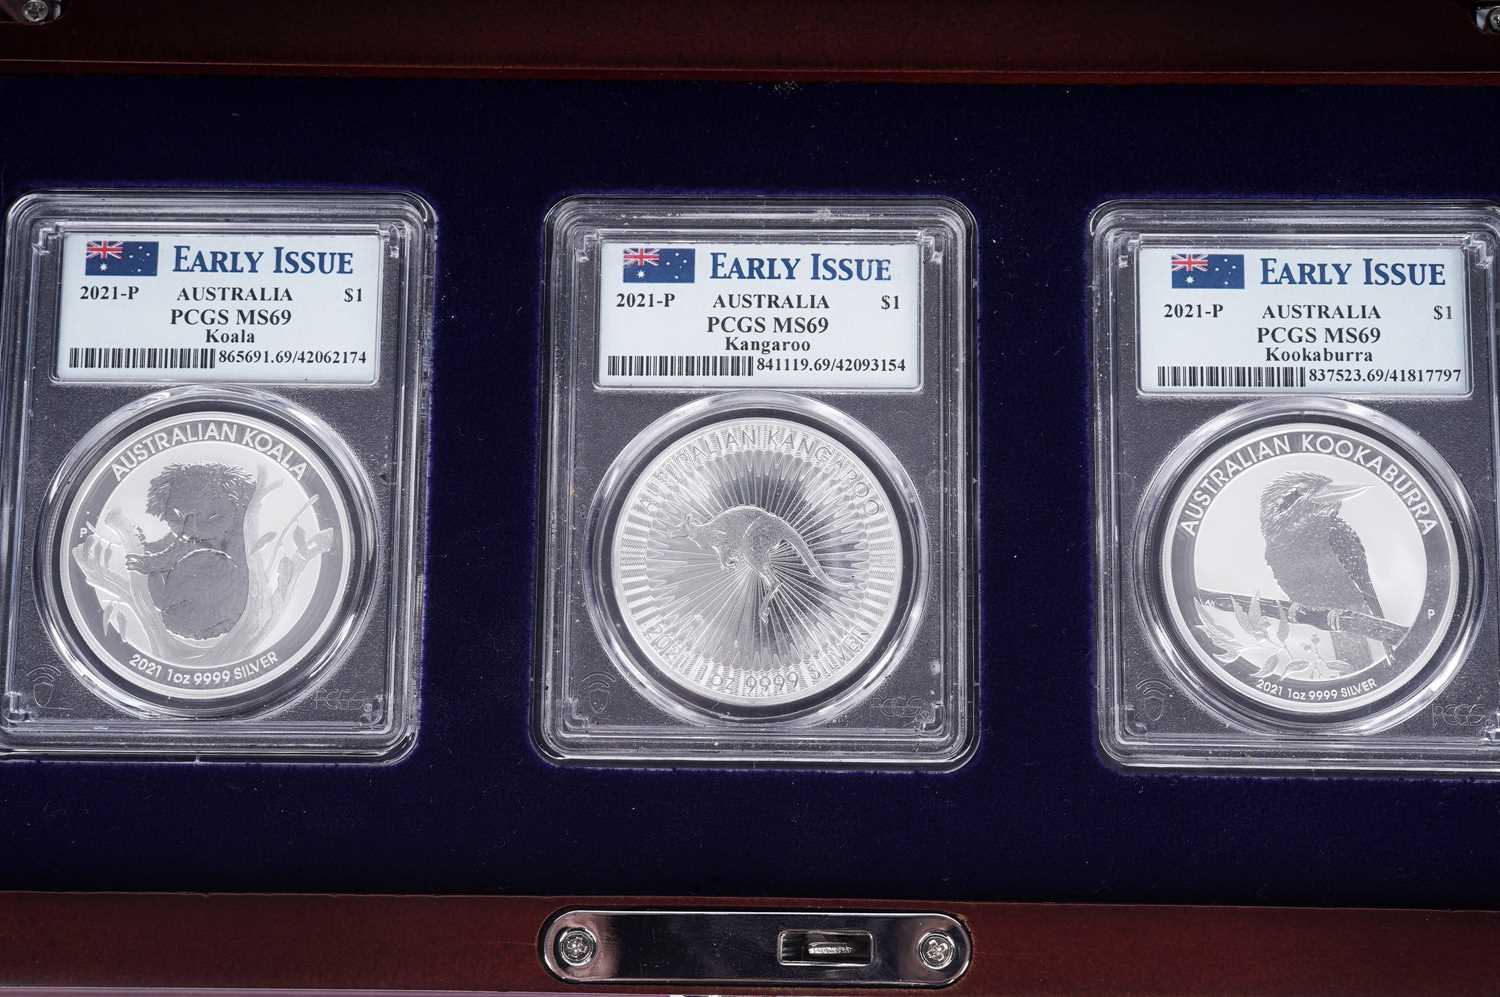 The 2021 Early Issue Australian silver dollar set - Image 2 of 3